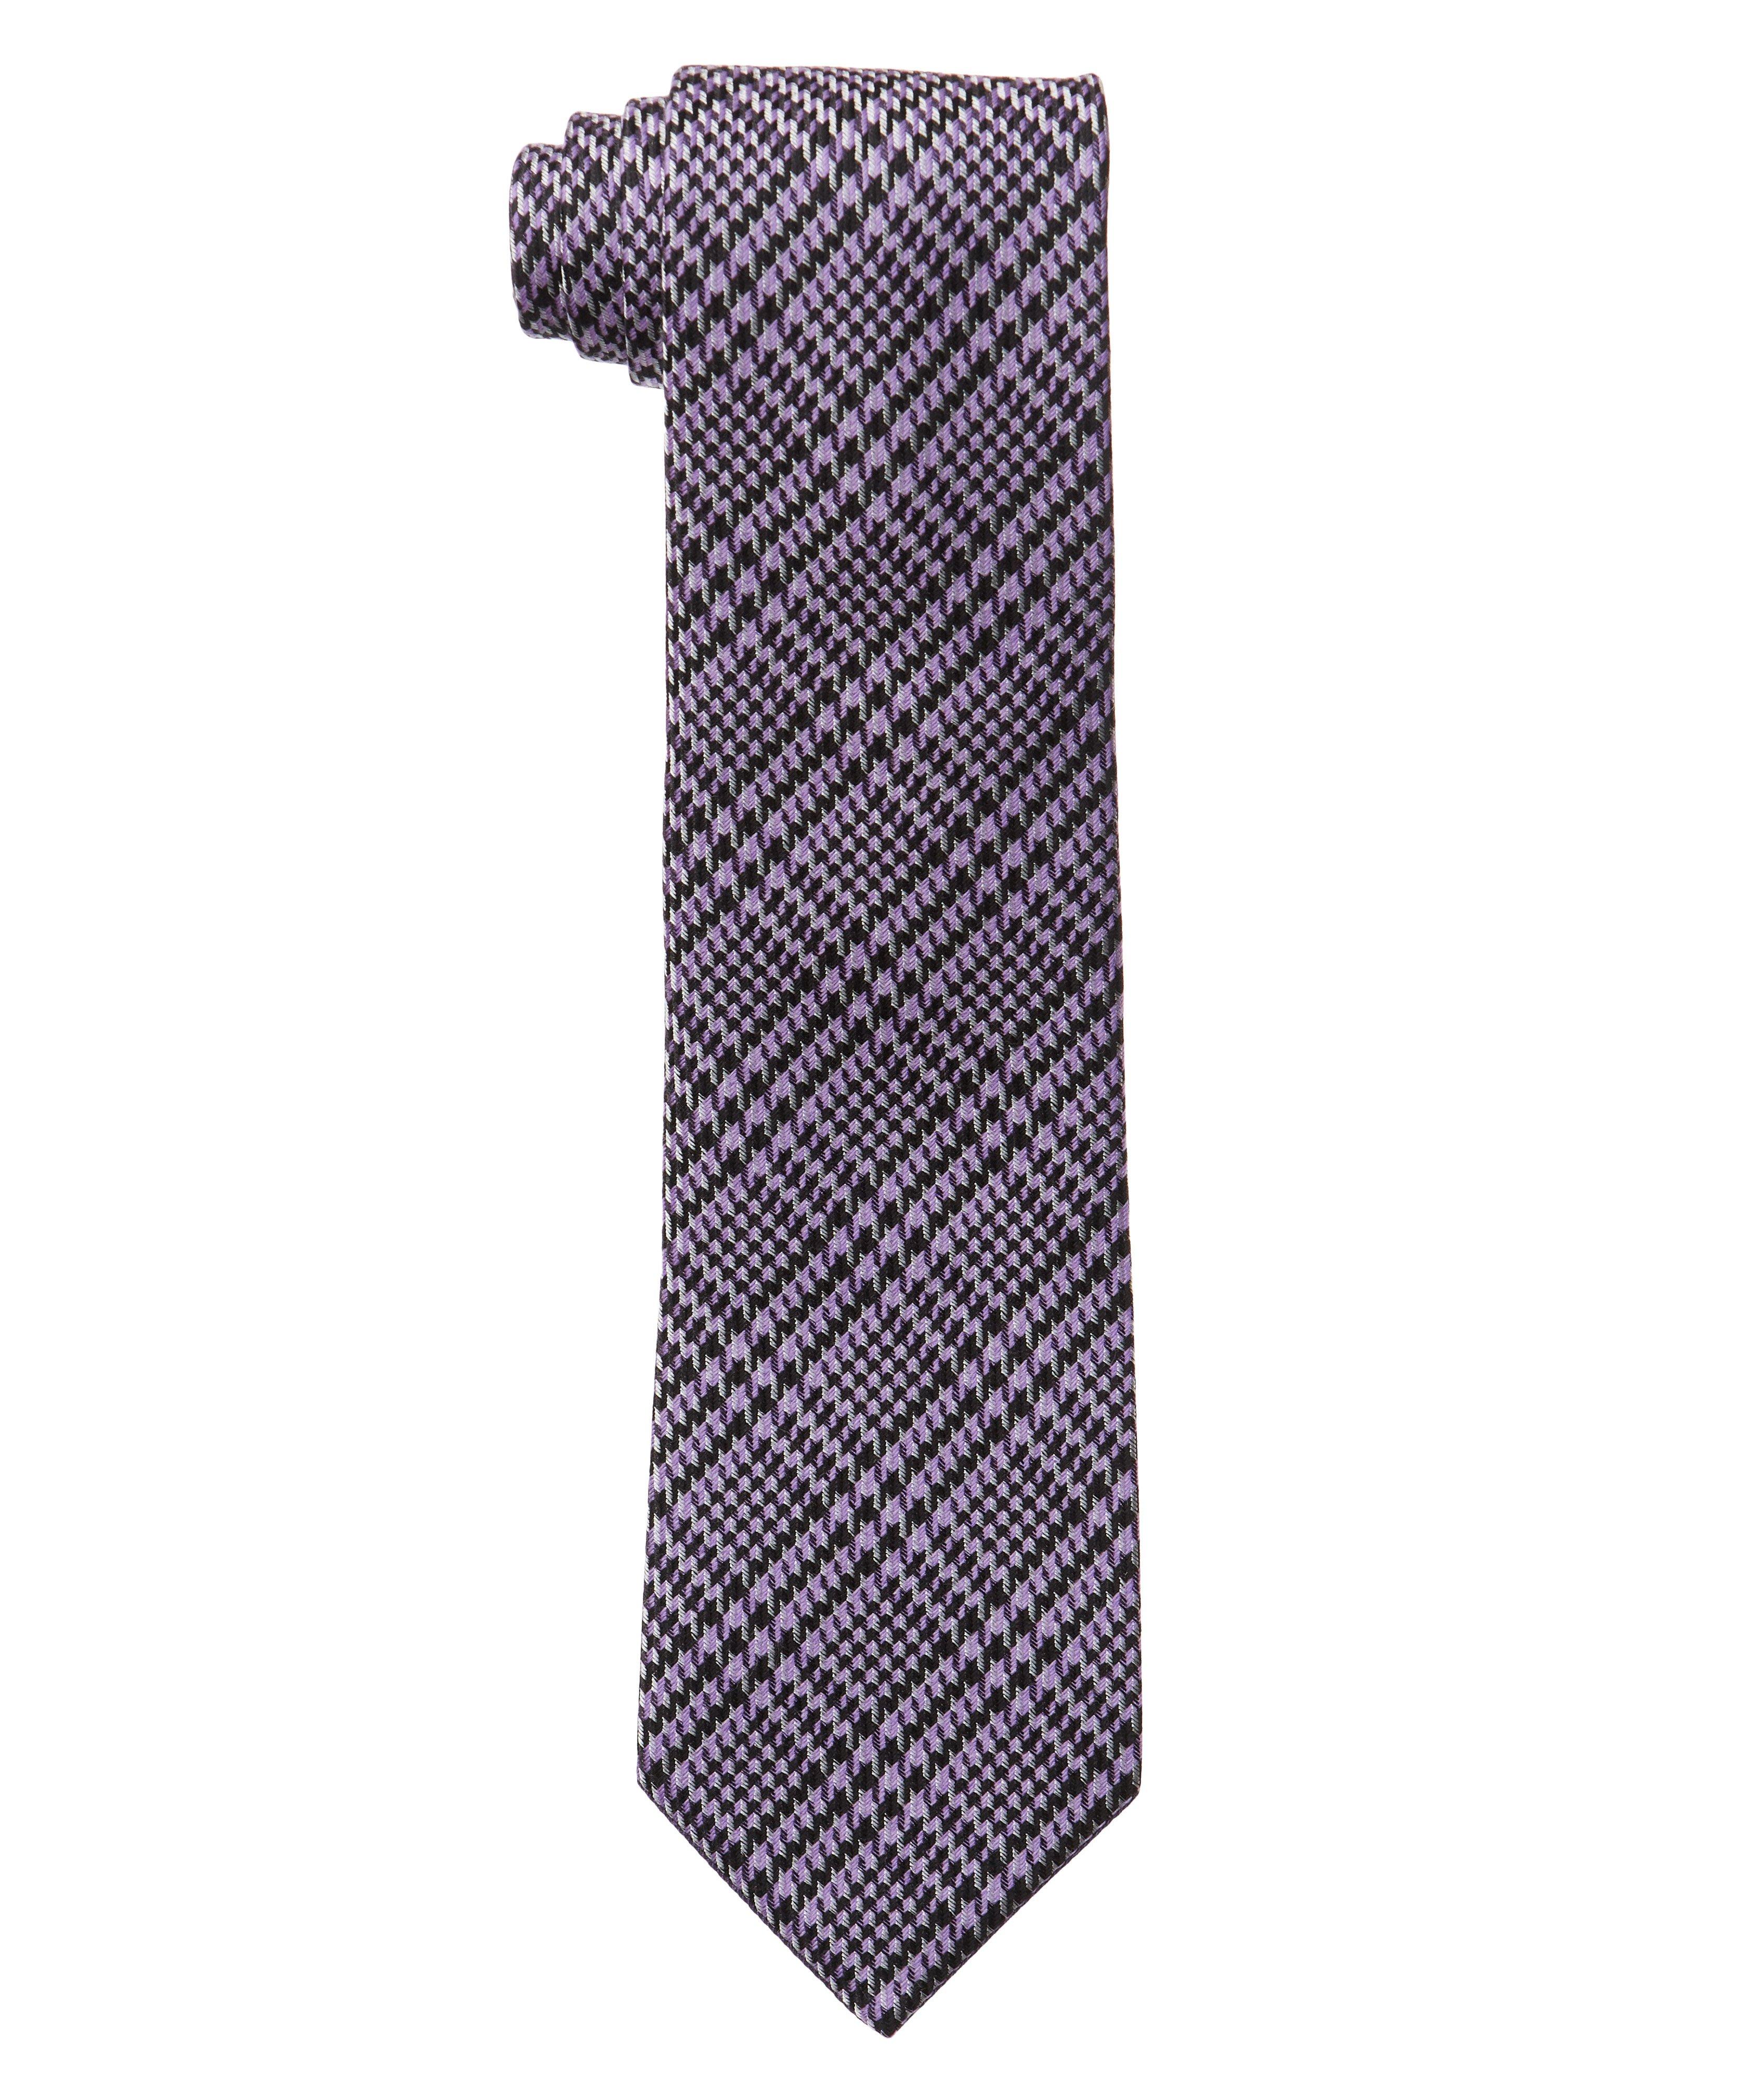 Houndstooth Check Silk-Wool Tie image 0